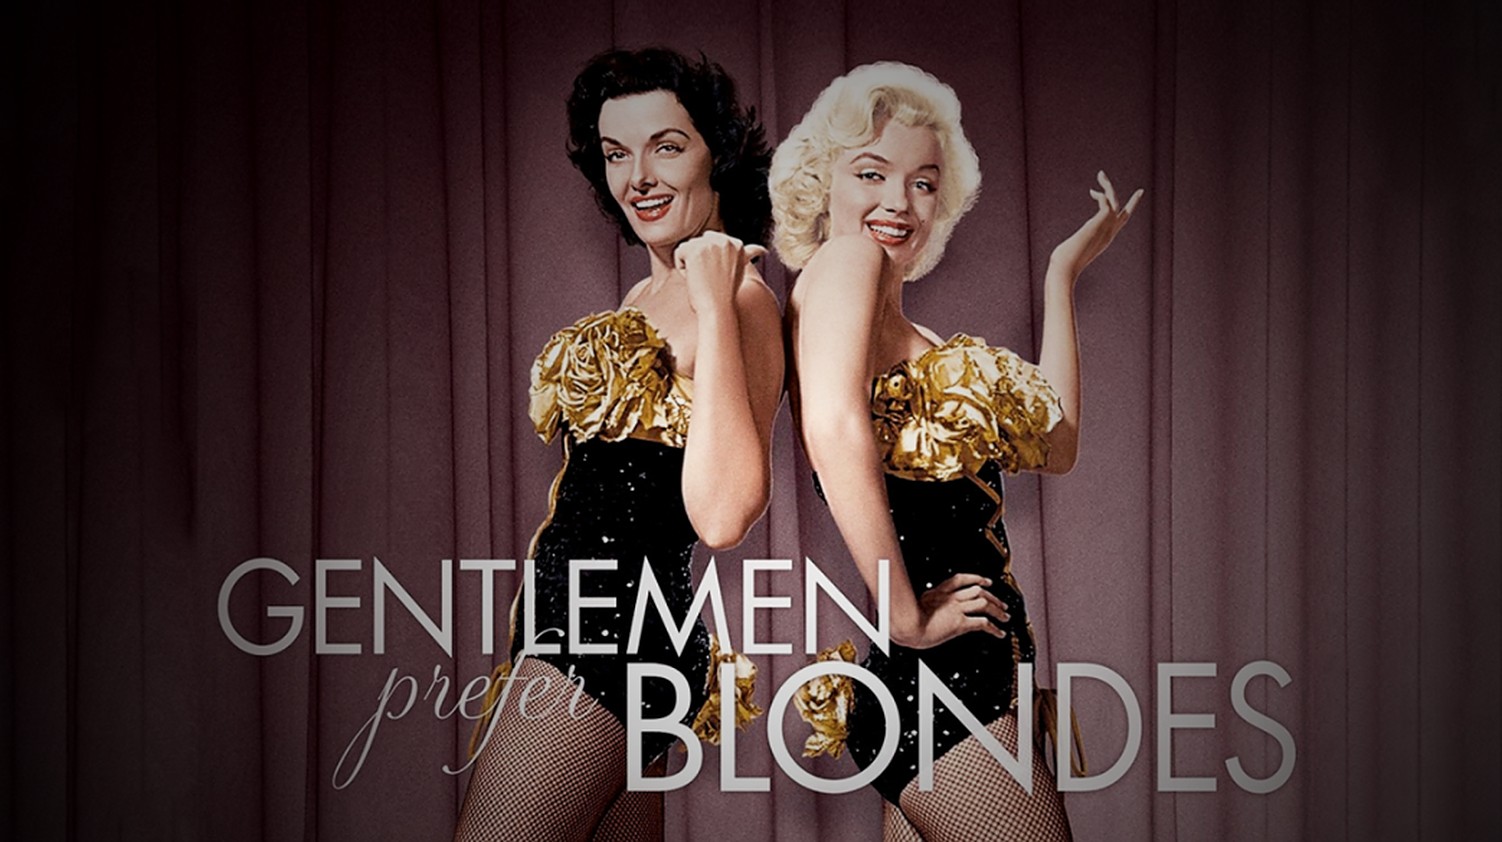 45 Facts about the movie Gentlemen Prefer Blondes - Facts.net